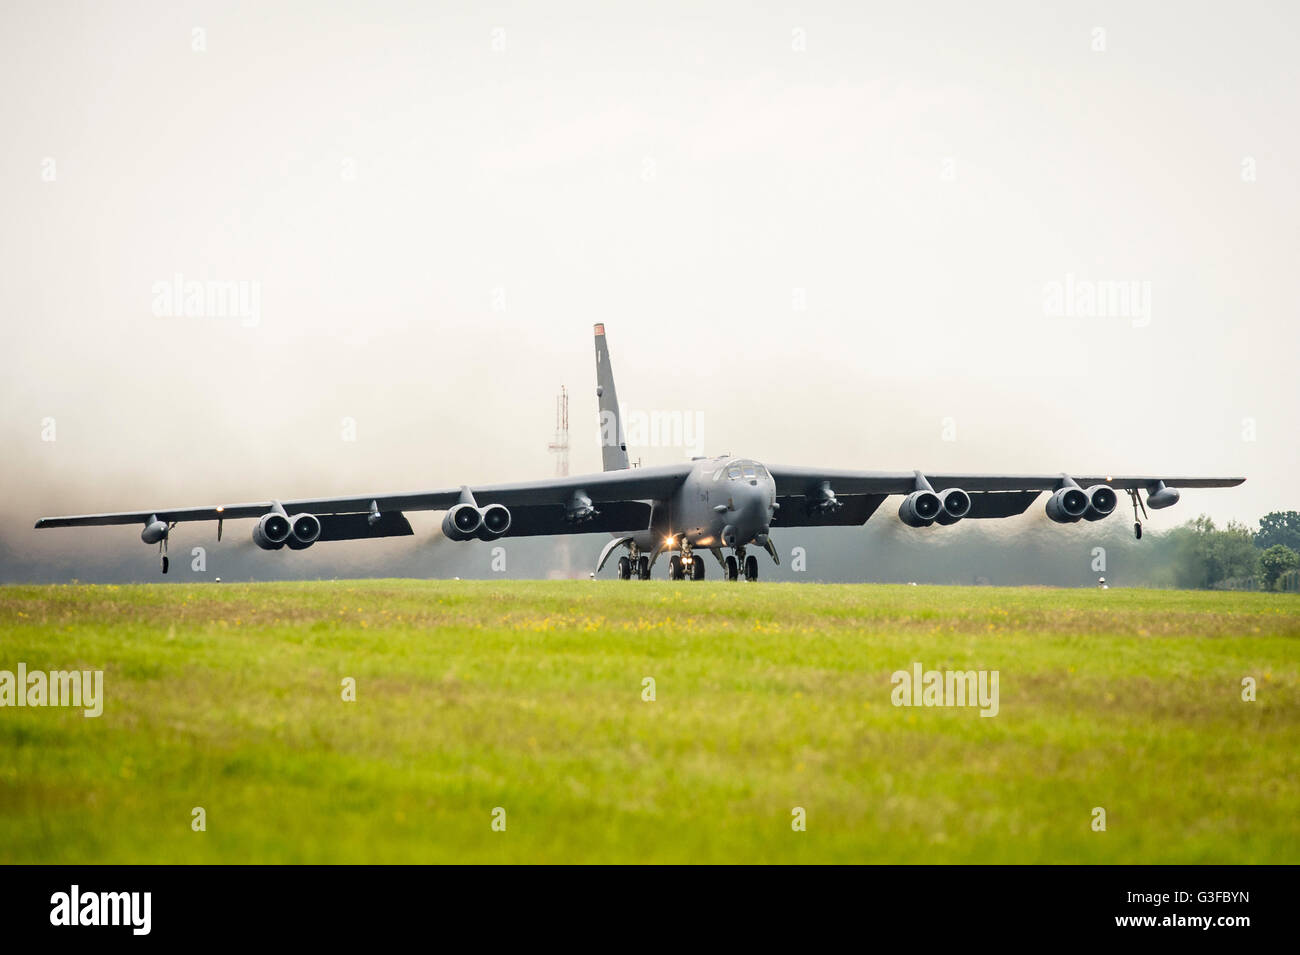 A United States Air Force (USAF) Boeing B-52H Stratofortress strategic bomber of the 23d Bomb Squadron, takes off from RAF Fairford airbase heading to Northern Europe on a NATO exercise, as part of a US Air Force Global Strike Command deployment to Fairford, for military training exercises. Stock Photo